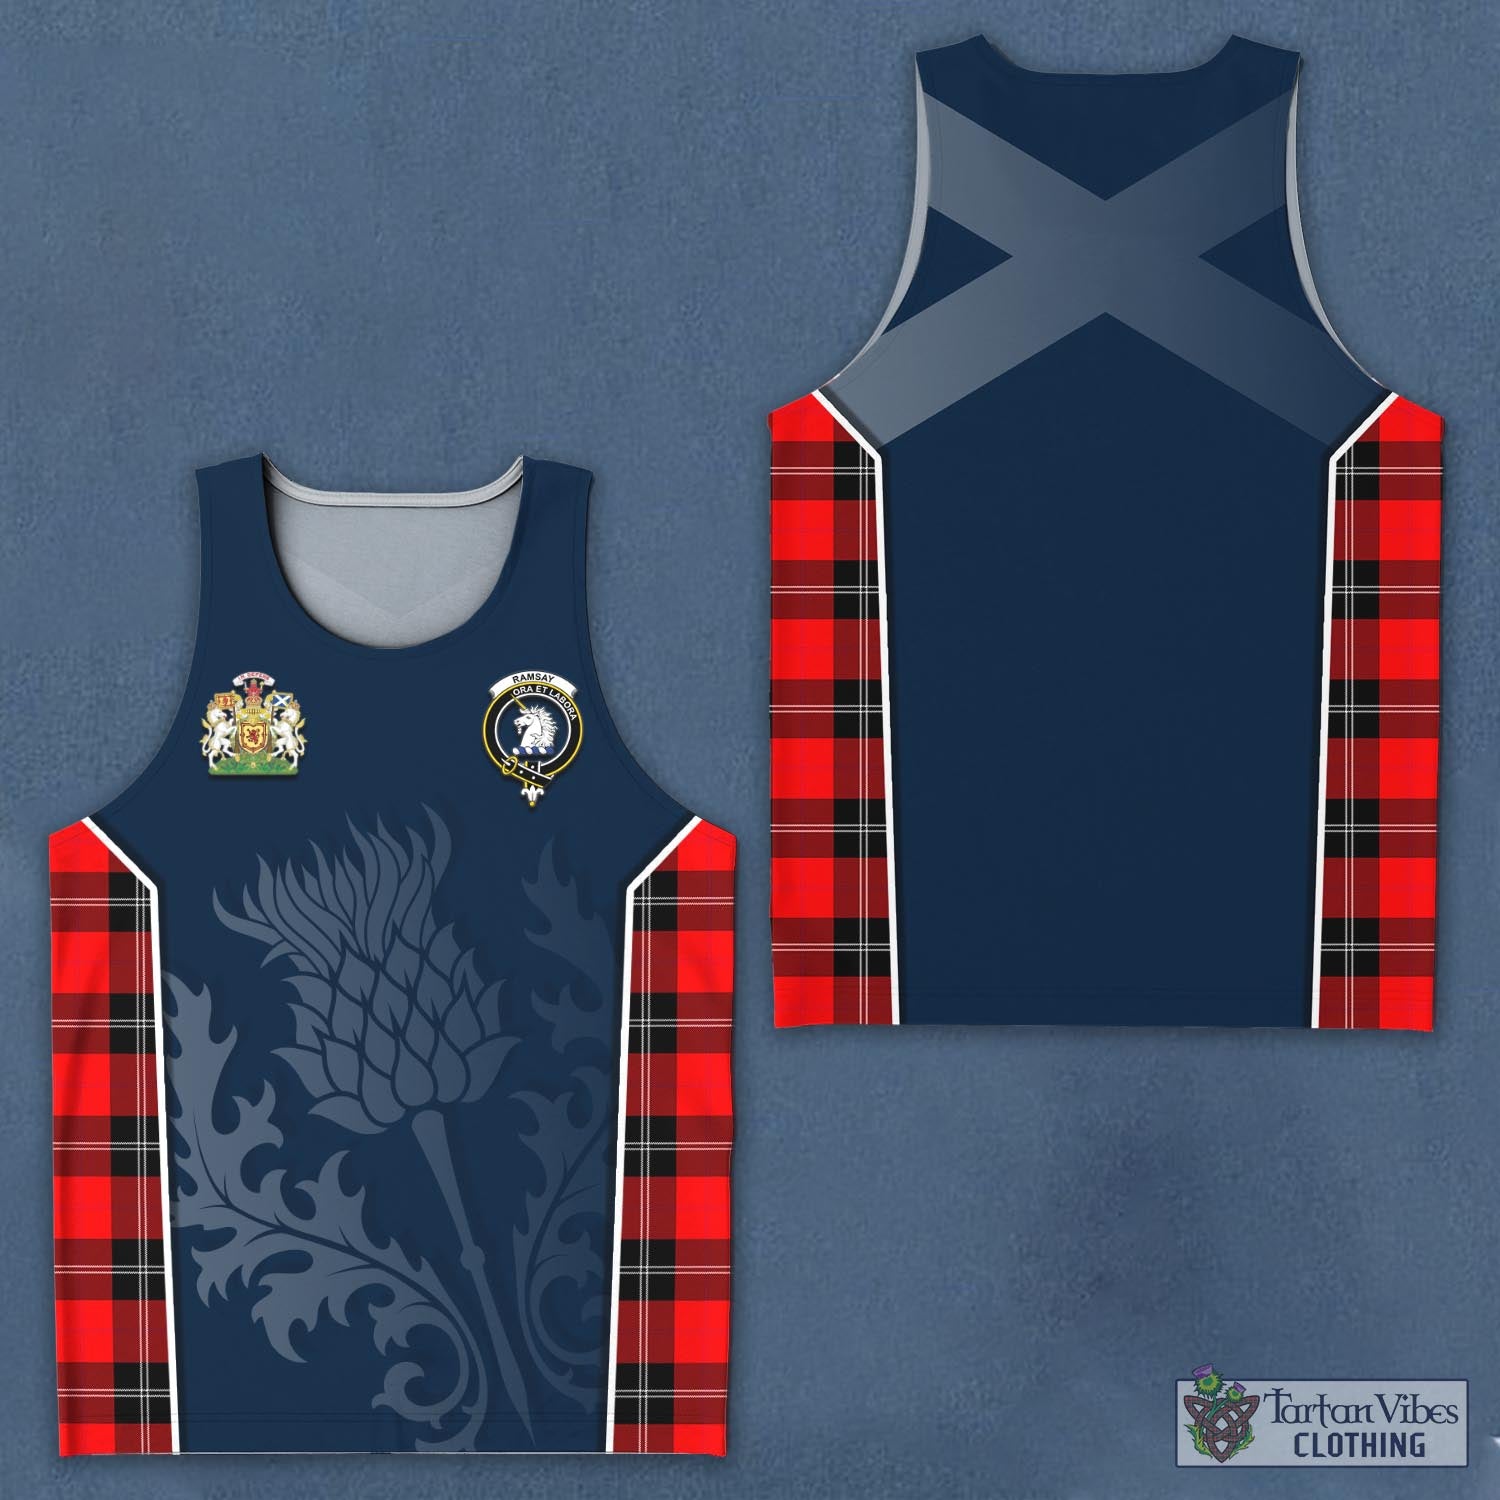 Tartan Vibes Clothing Ramsay Modern Tartan Men's Tanks Top with Family Crest and Scottish Thistle Vibes Sport Style